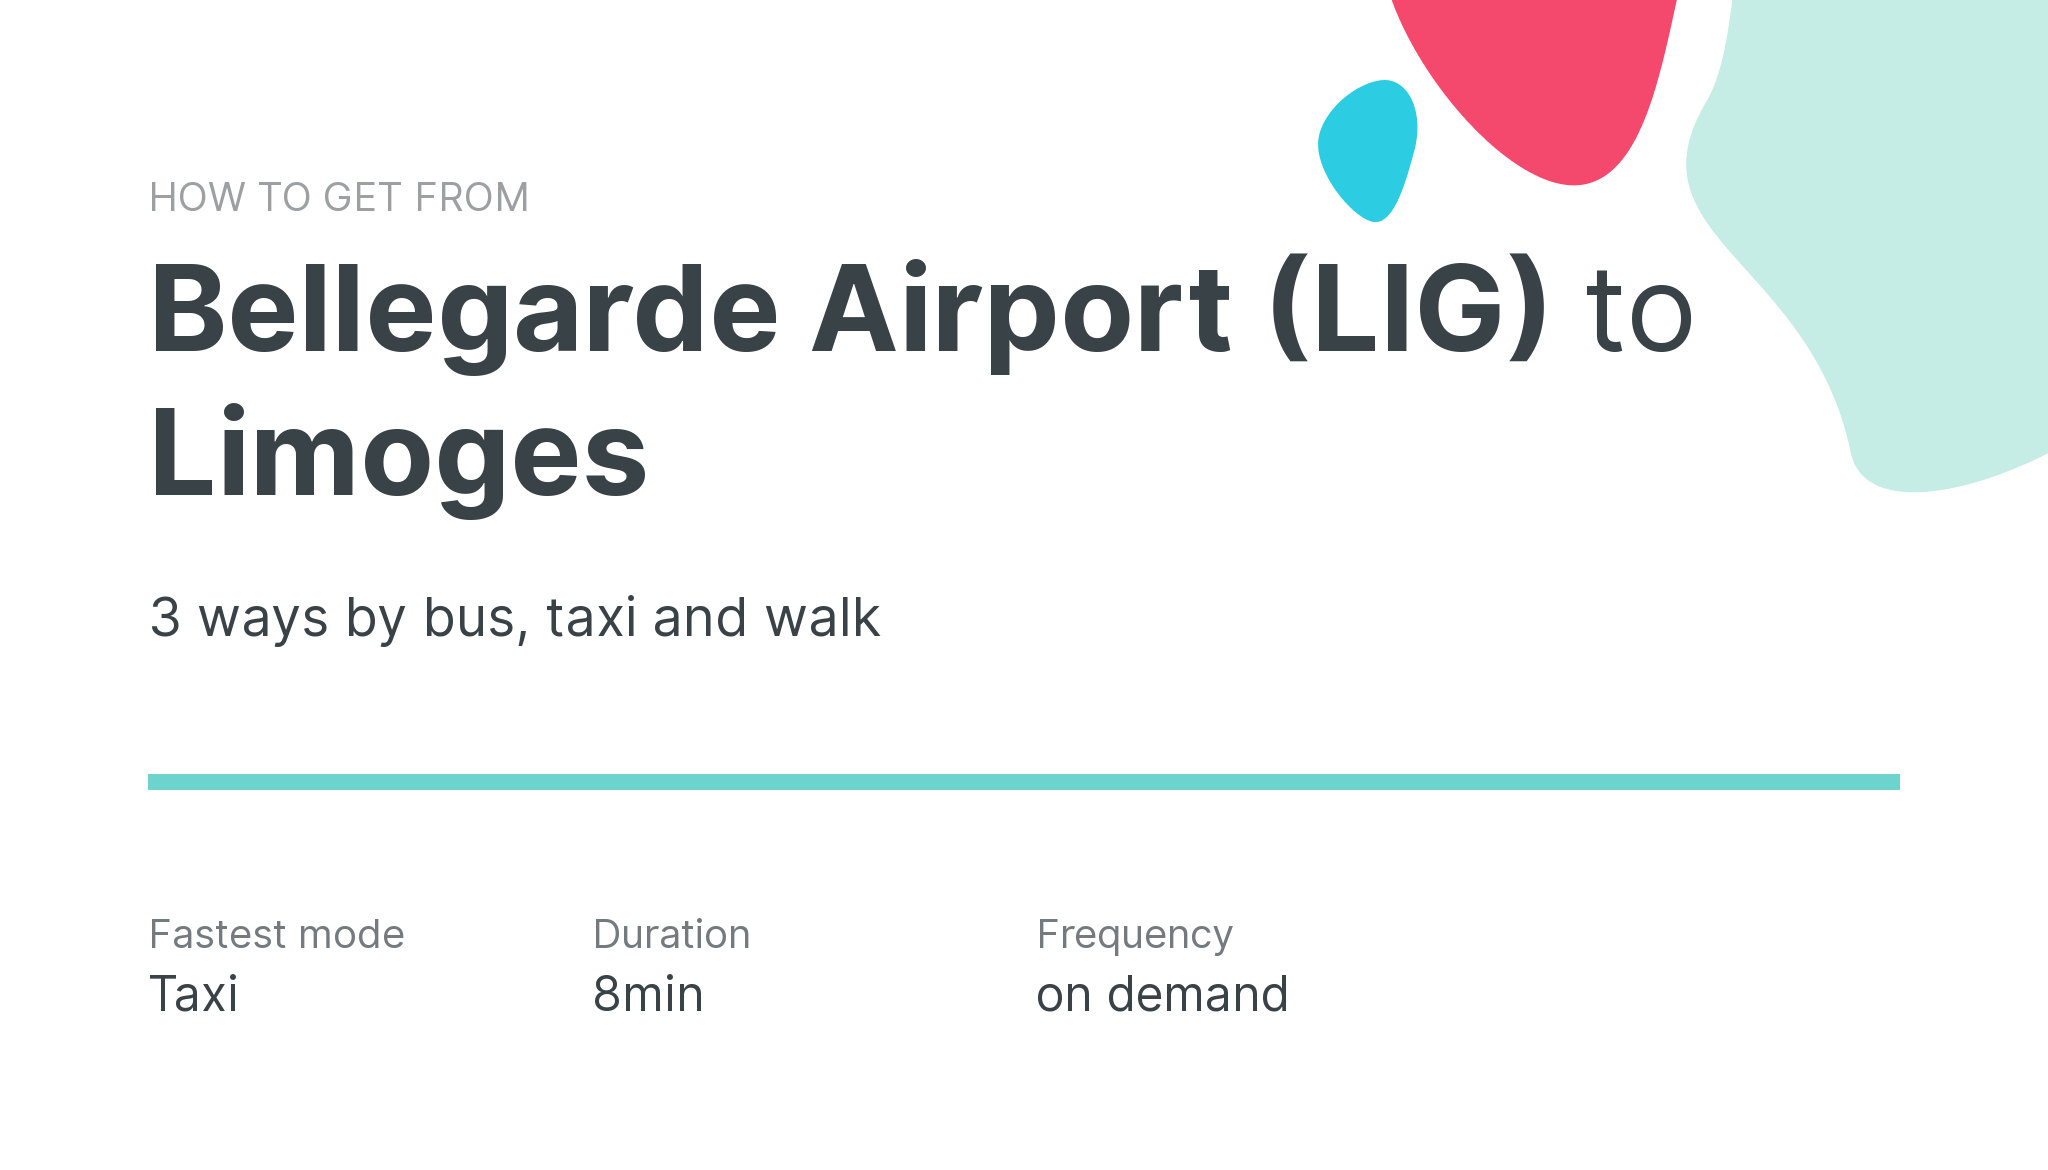 How do I get from Bellegarde Airport (LIG) to Limoges